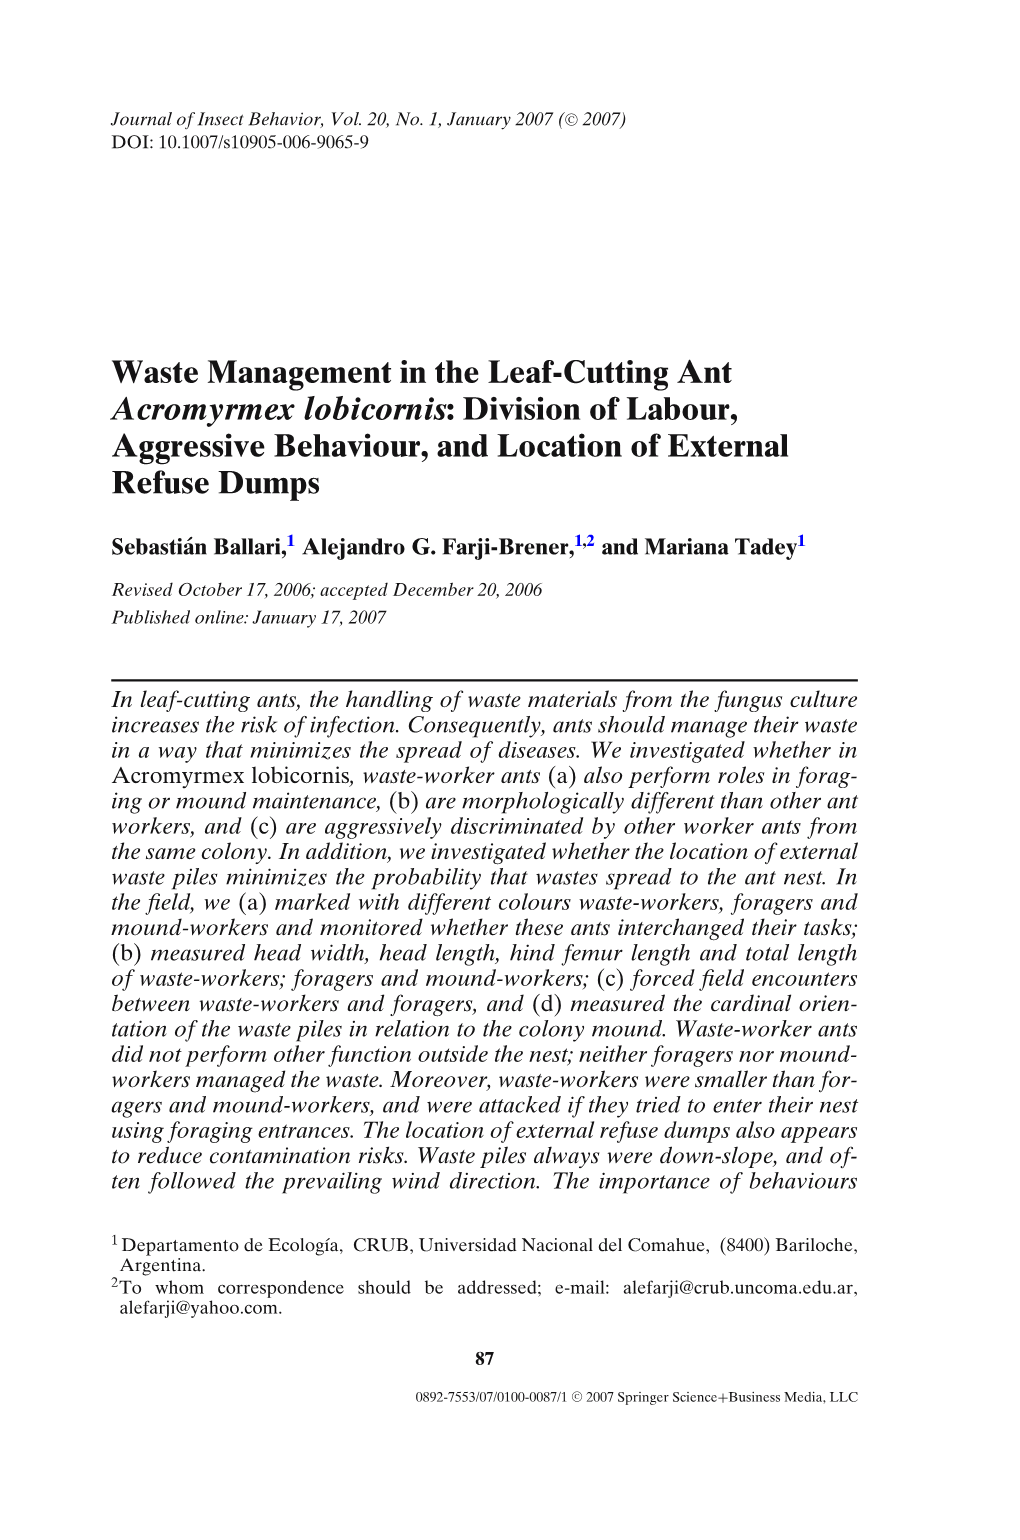 Waste Management in the Leaf-Cutting Ant Acromyrmex Lobicornis: Division of Labour, Aggressive Behaviour, and Location of External Refuse Dumps